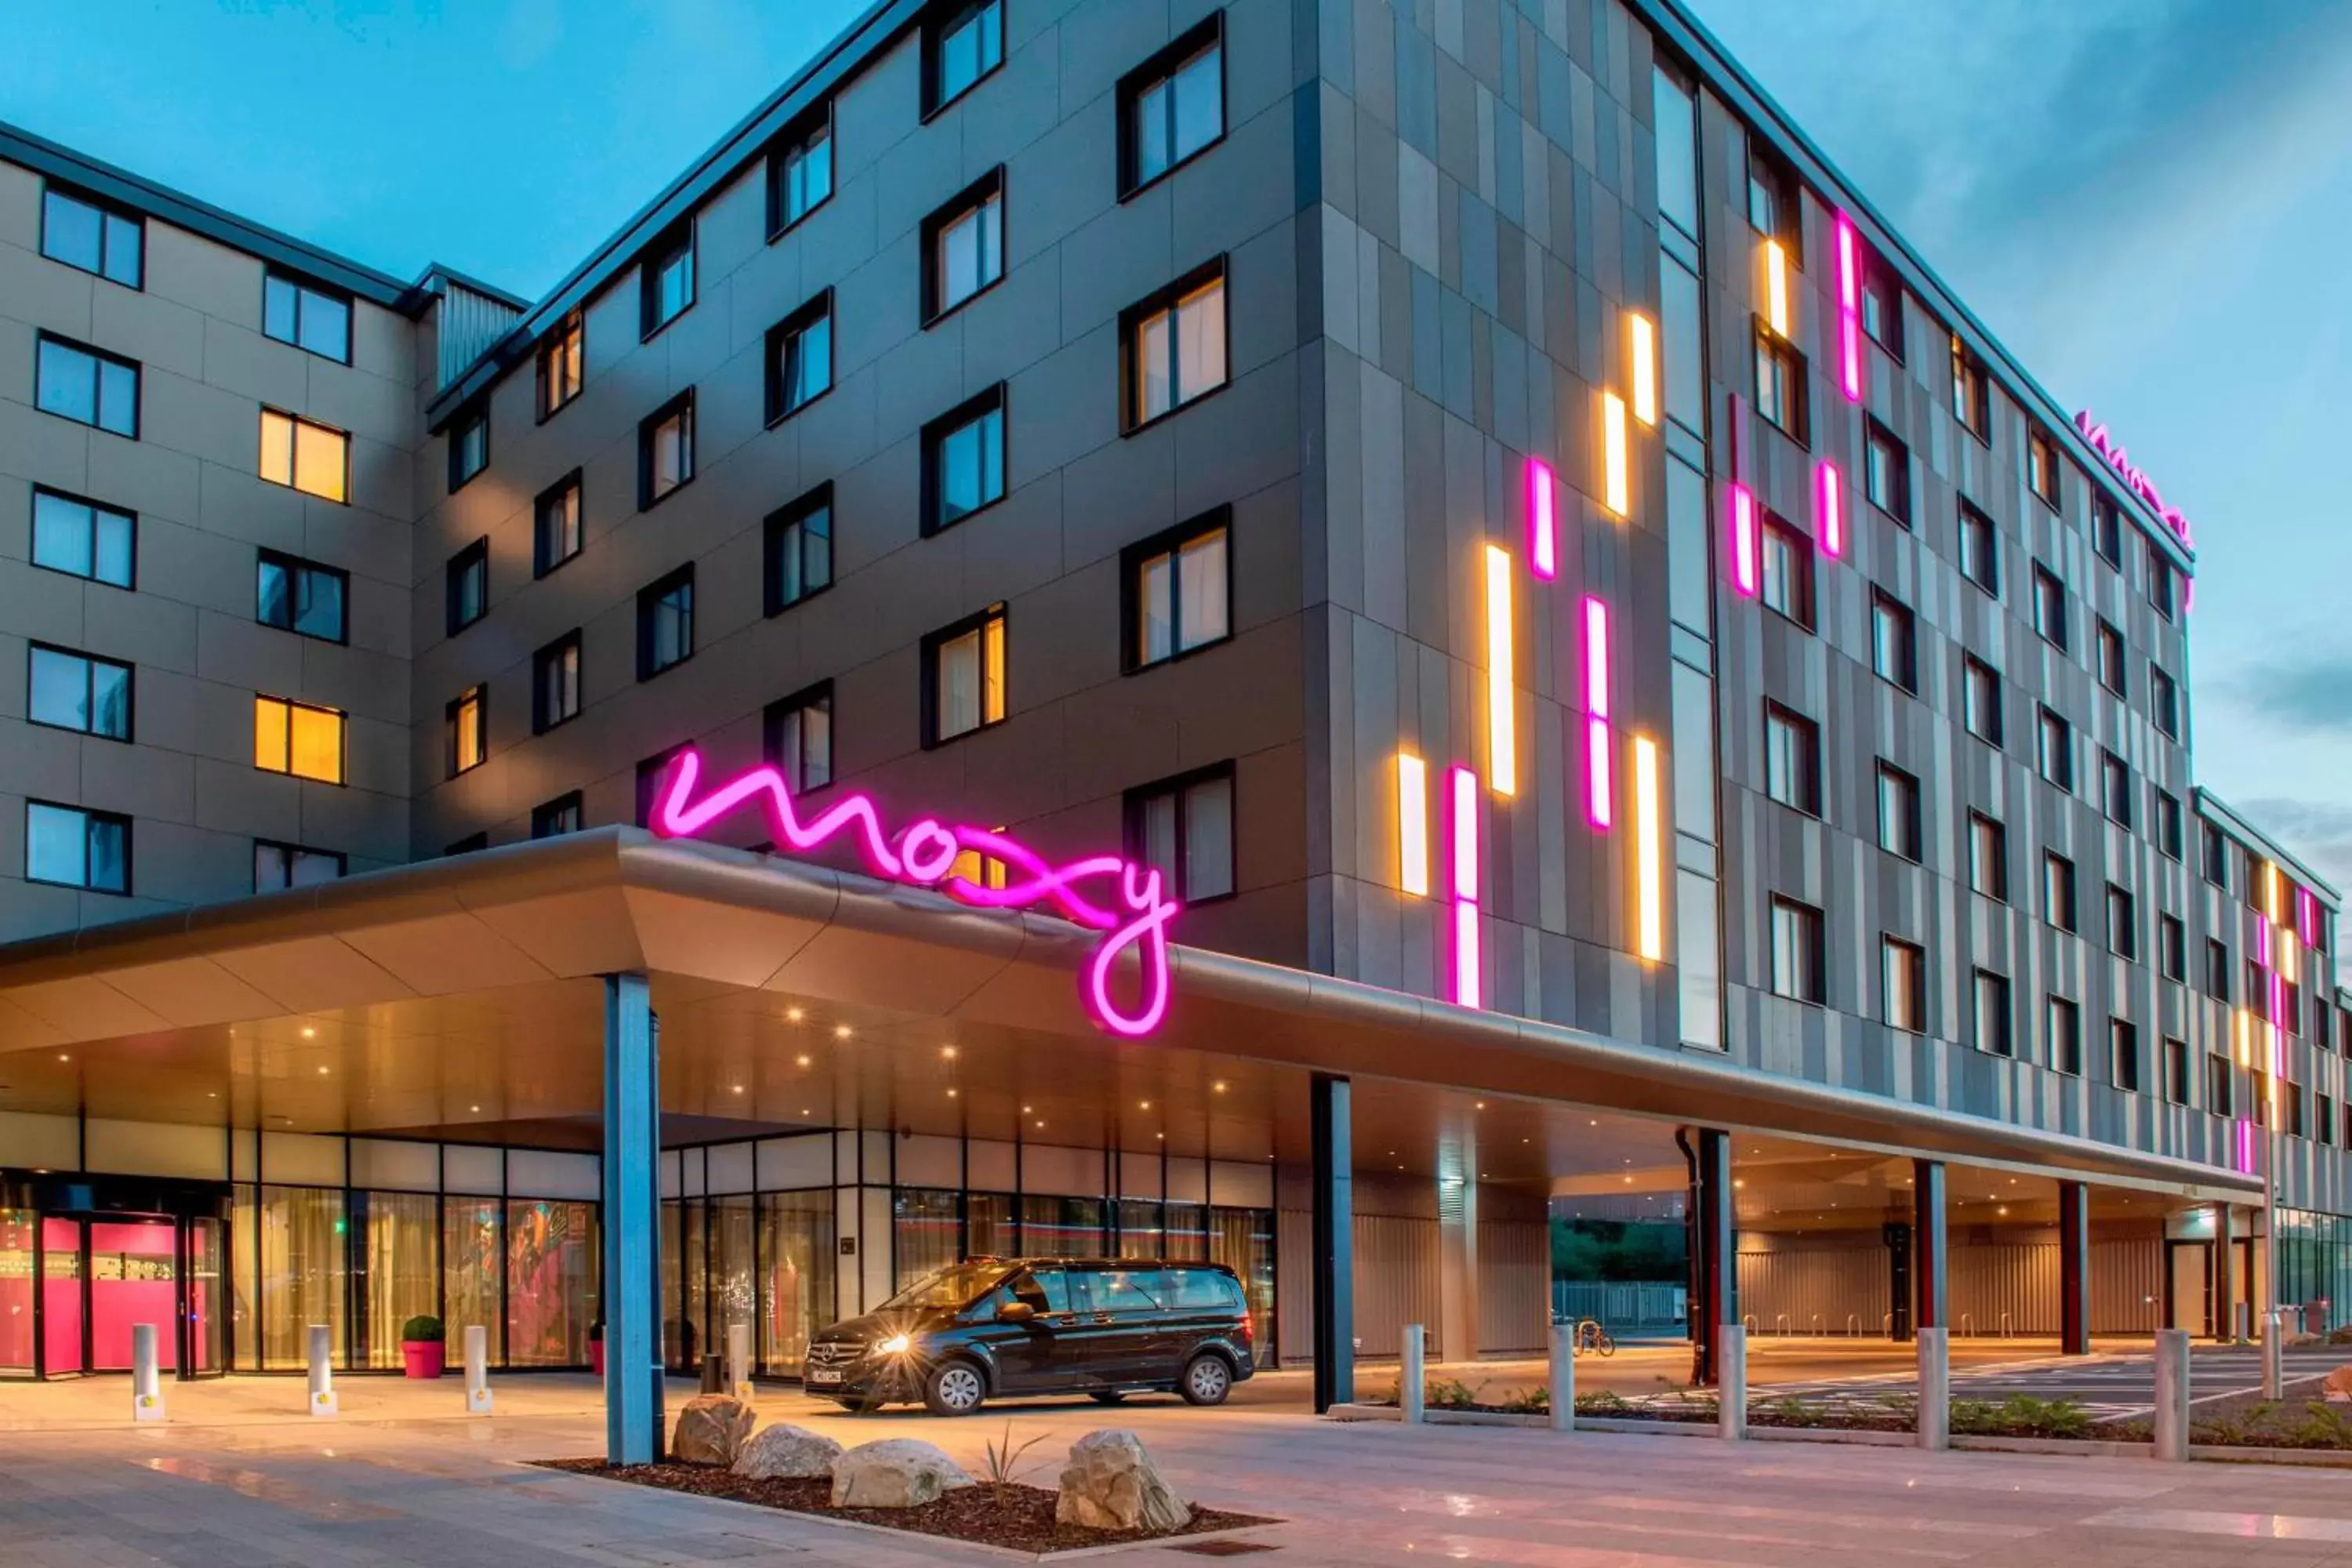 Property Building in Moxy London Heathrow Airport